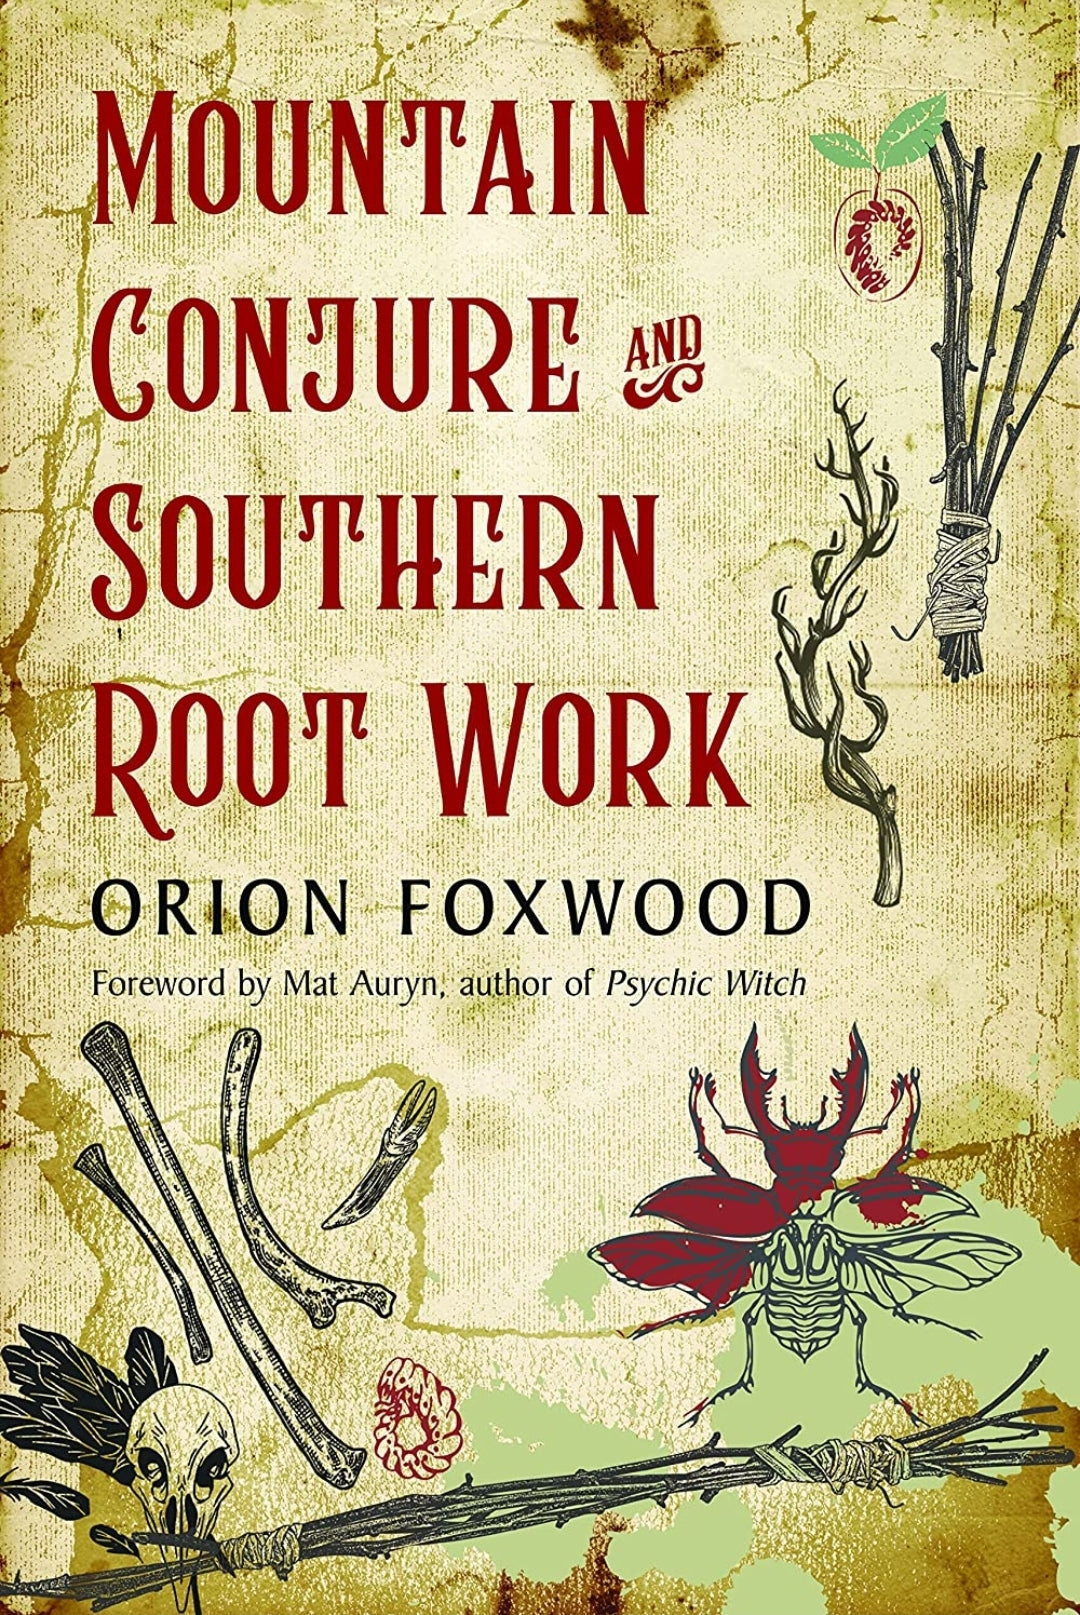 Mountain Conjure & Southern Root Work